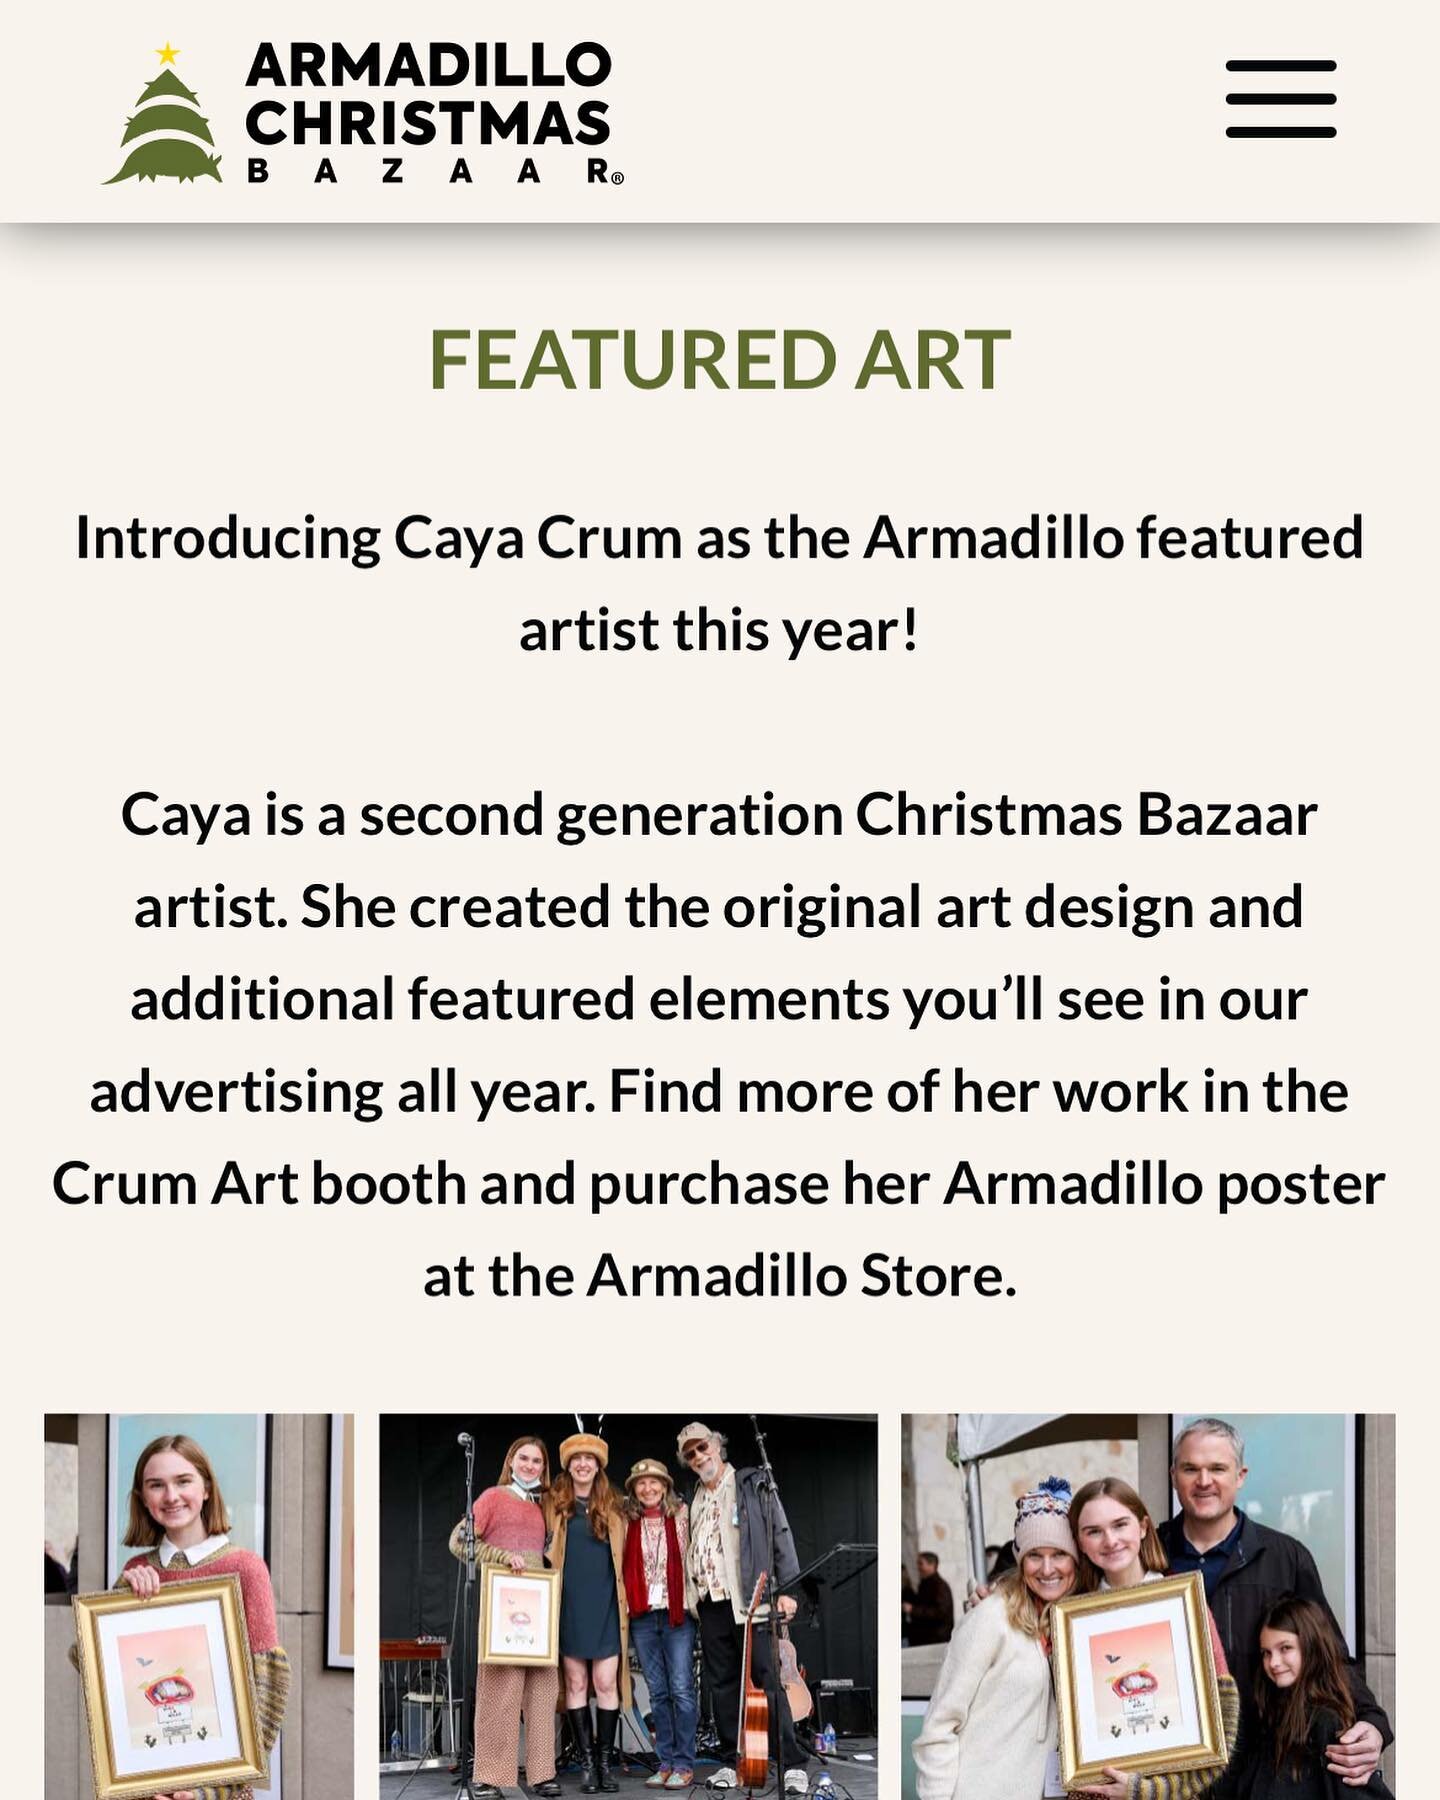 Check it out on the @armadillobazaar website!  @heyitscaya discussing her art, her piece for the Bazaar and what inspires her.  Get her print exclusively at the Armadillo Bazaar Dec 17-23!!! https://armadillobazaar.com/featured-art/  @shinyribs #aust